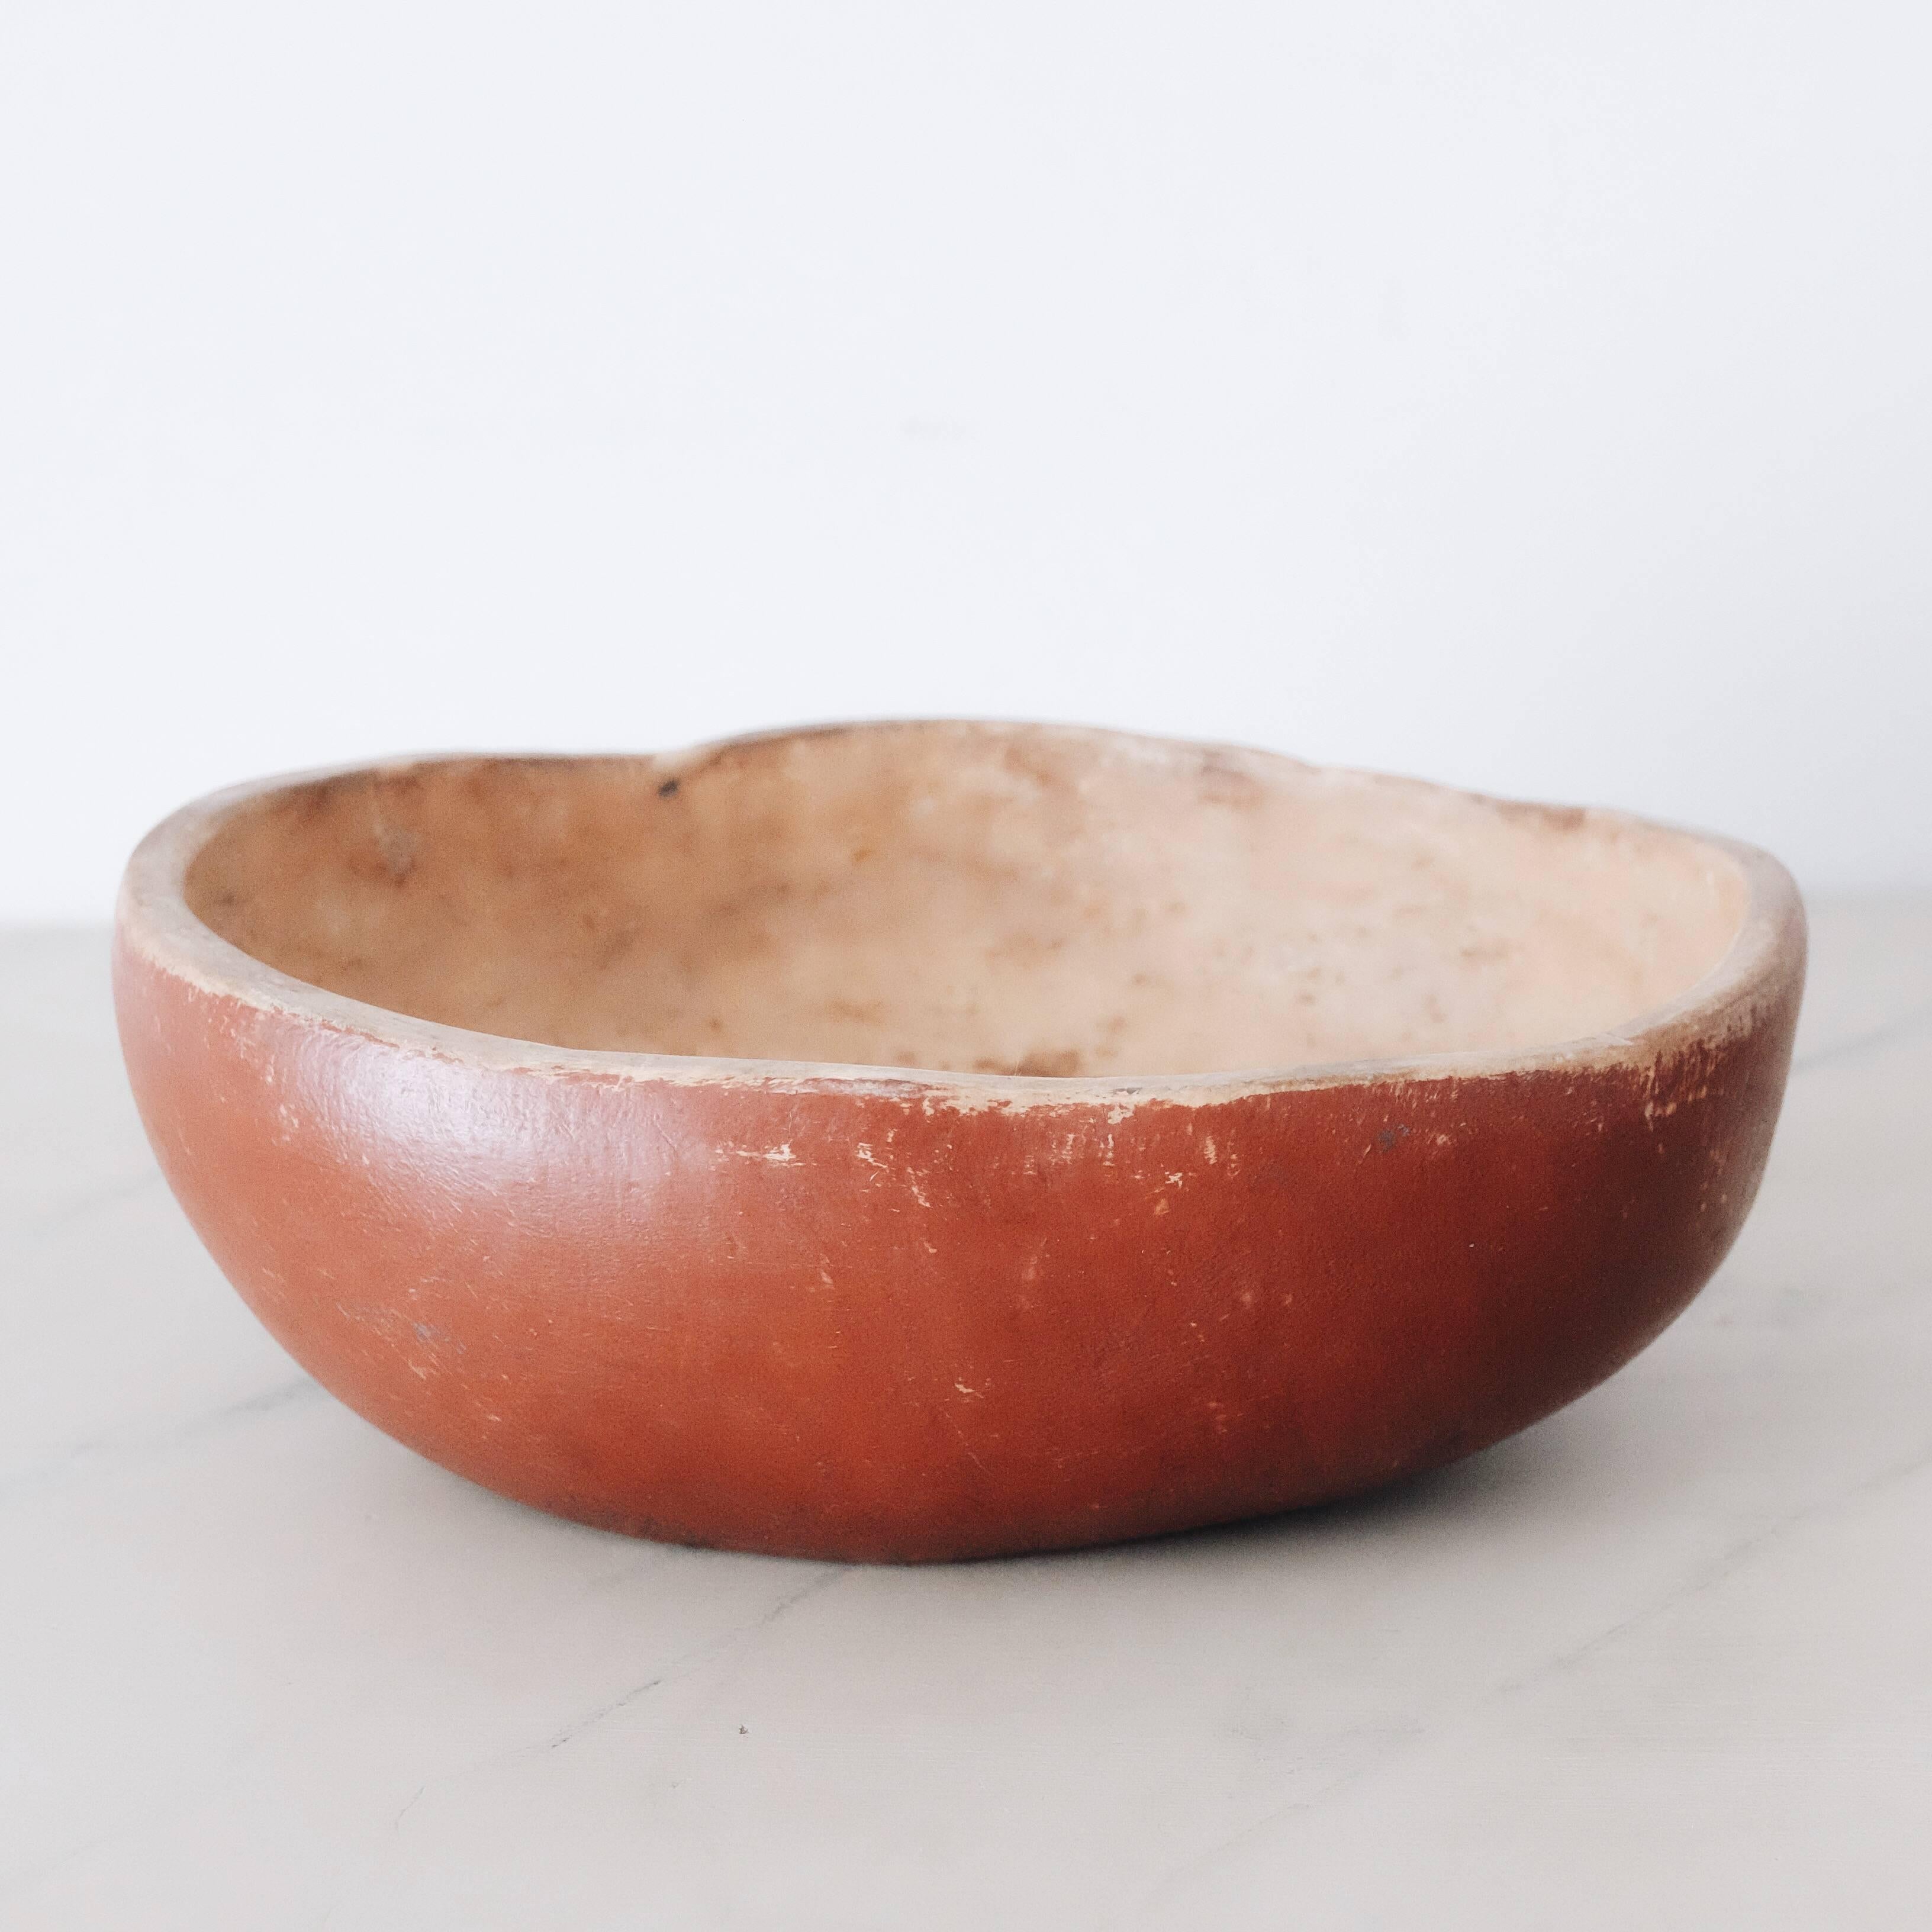 Swedish 19th century root wood bowl in original colour. Dated 1882
 
Condition:    Good 
Wear:          Wear consistent with age and use
Finish:         Original
Year:           Ca 1882